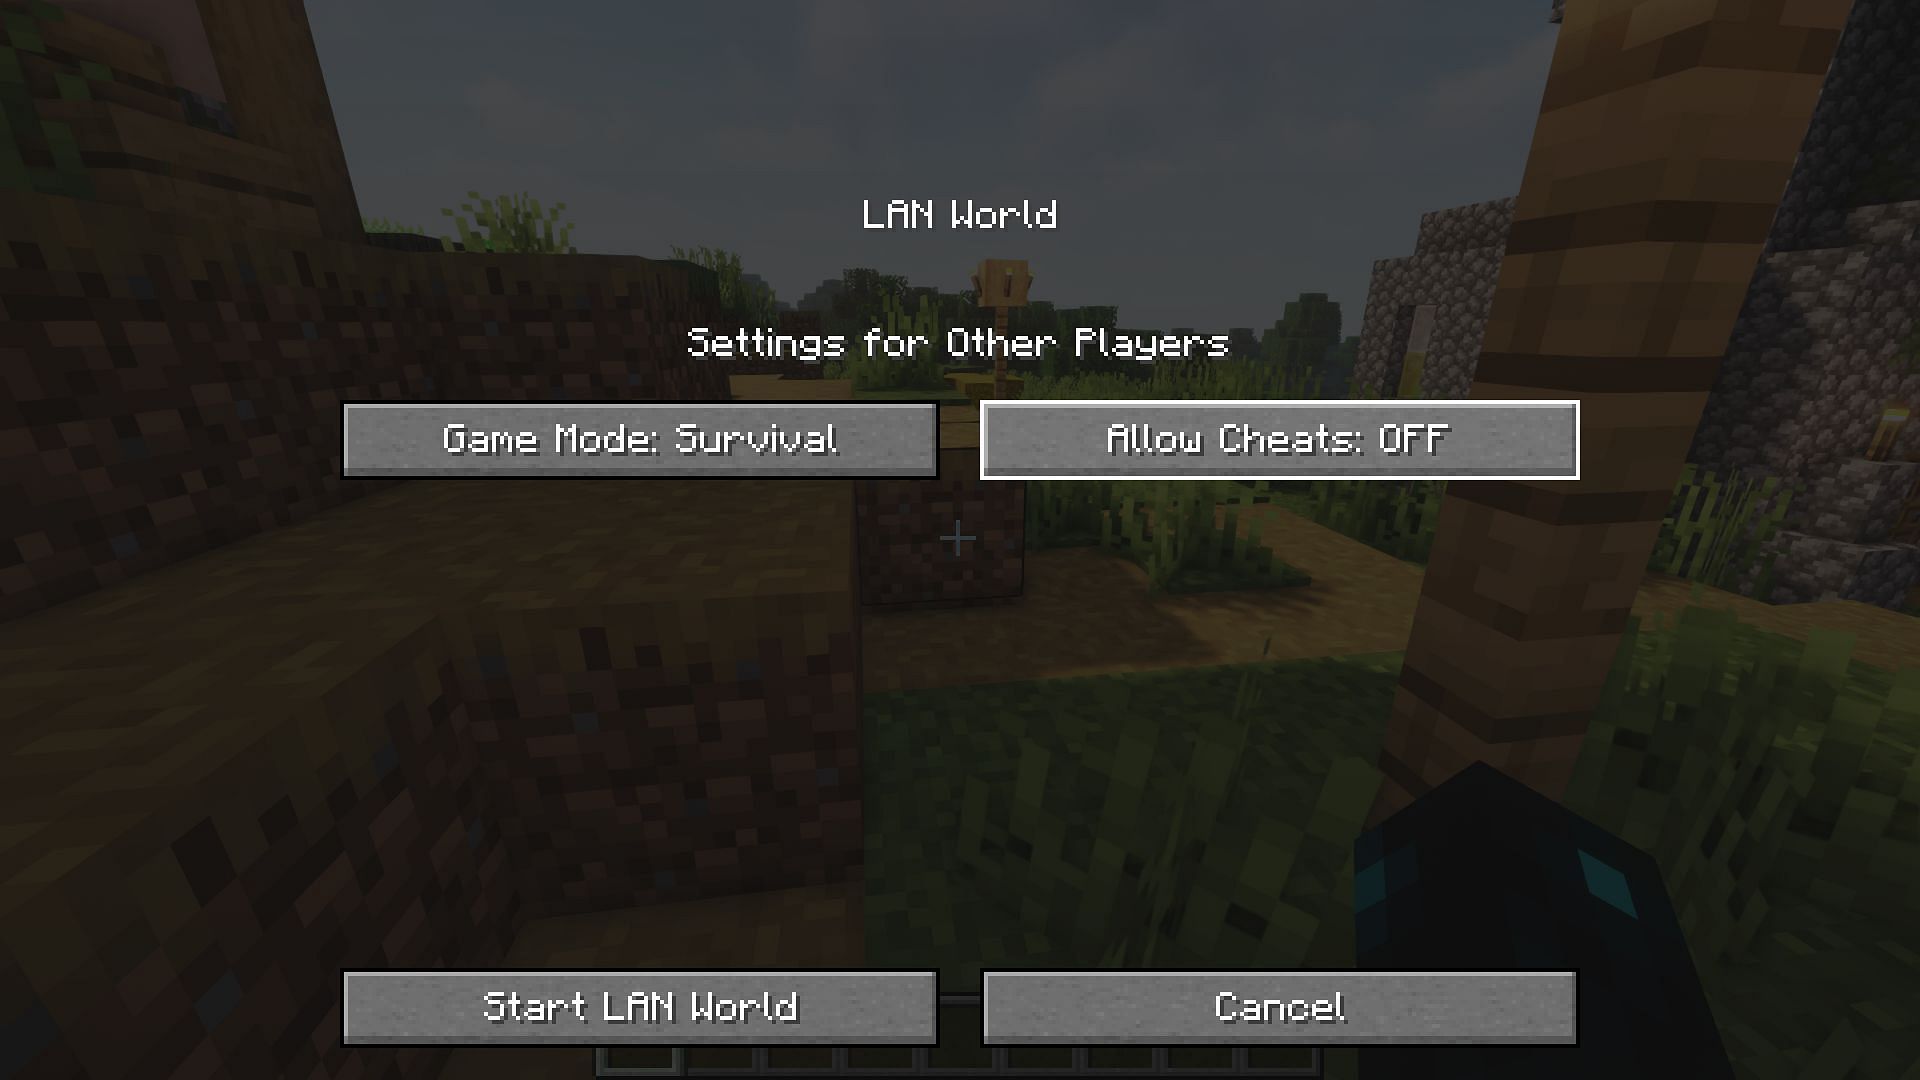 Open to LAN temporarily allows cheats so that players can enter commands (Image via Minecraft 1.19 update)